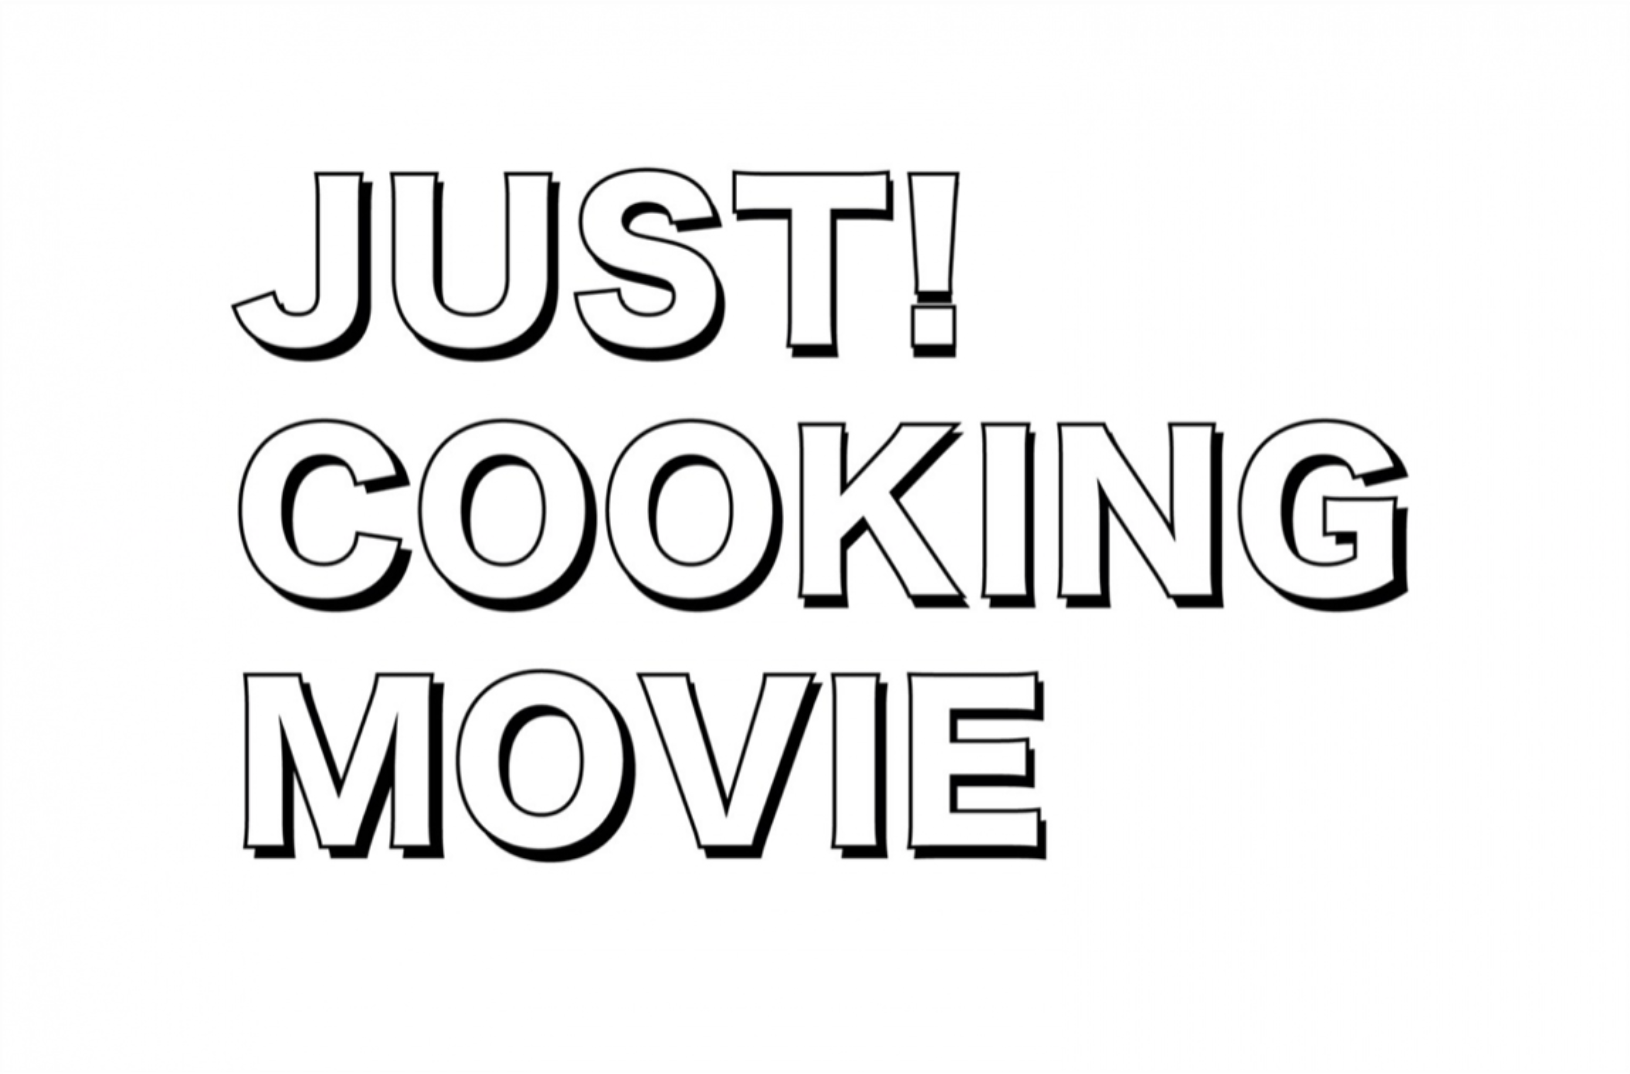 JUST! COOKING MOVIE　#2